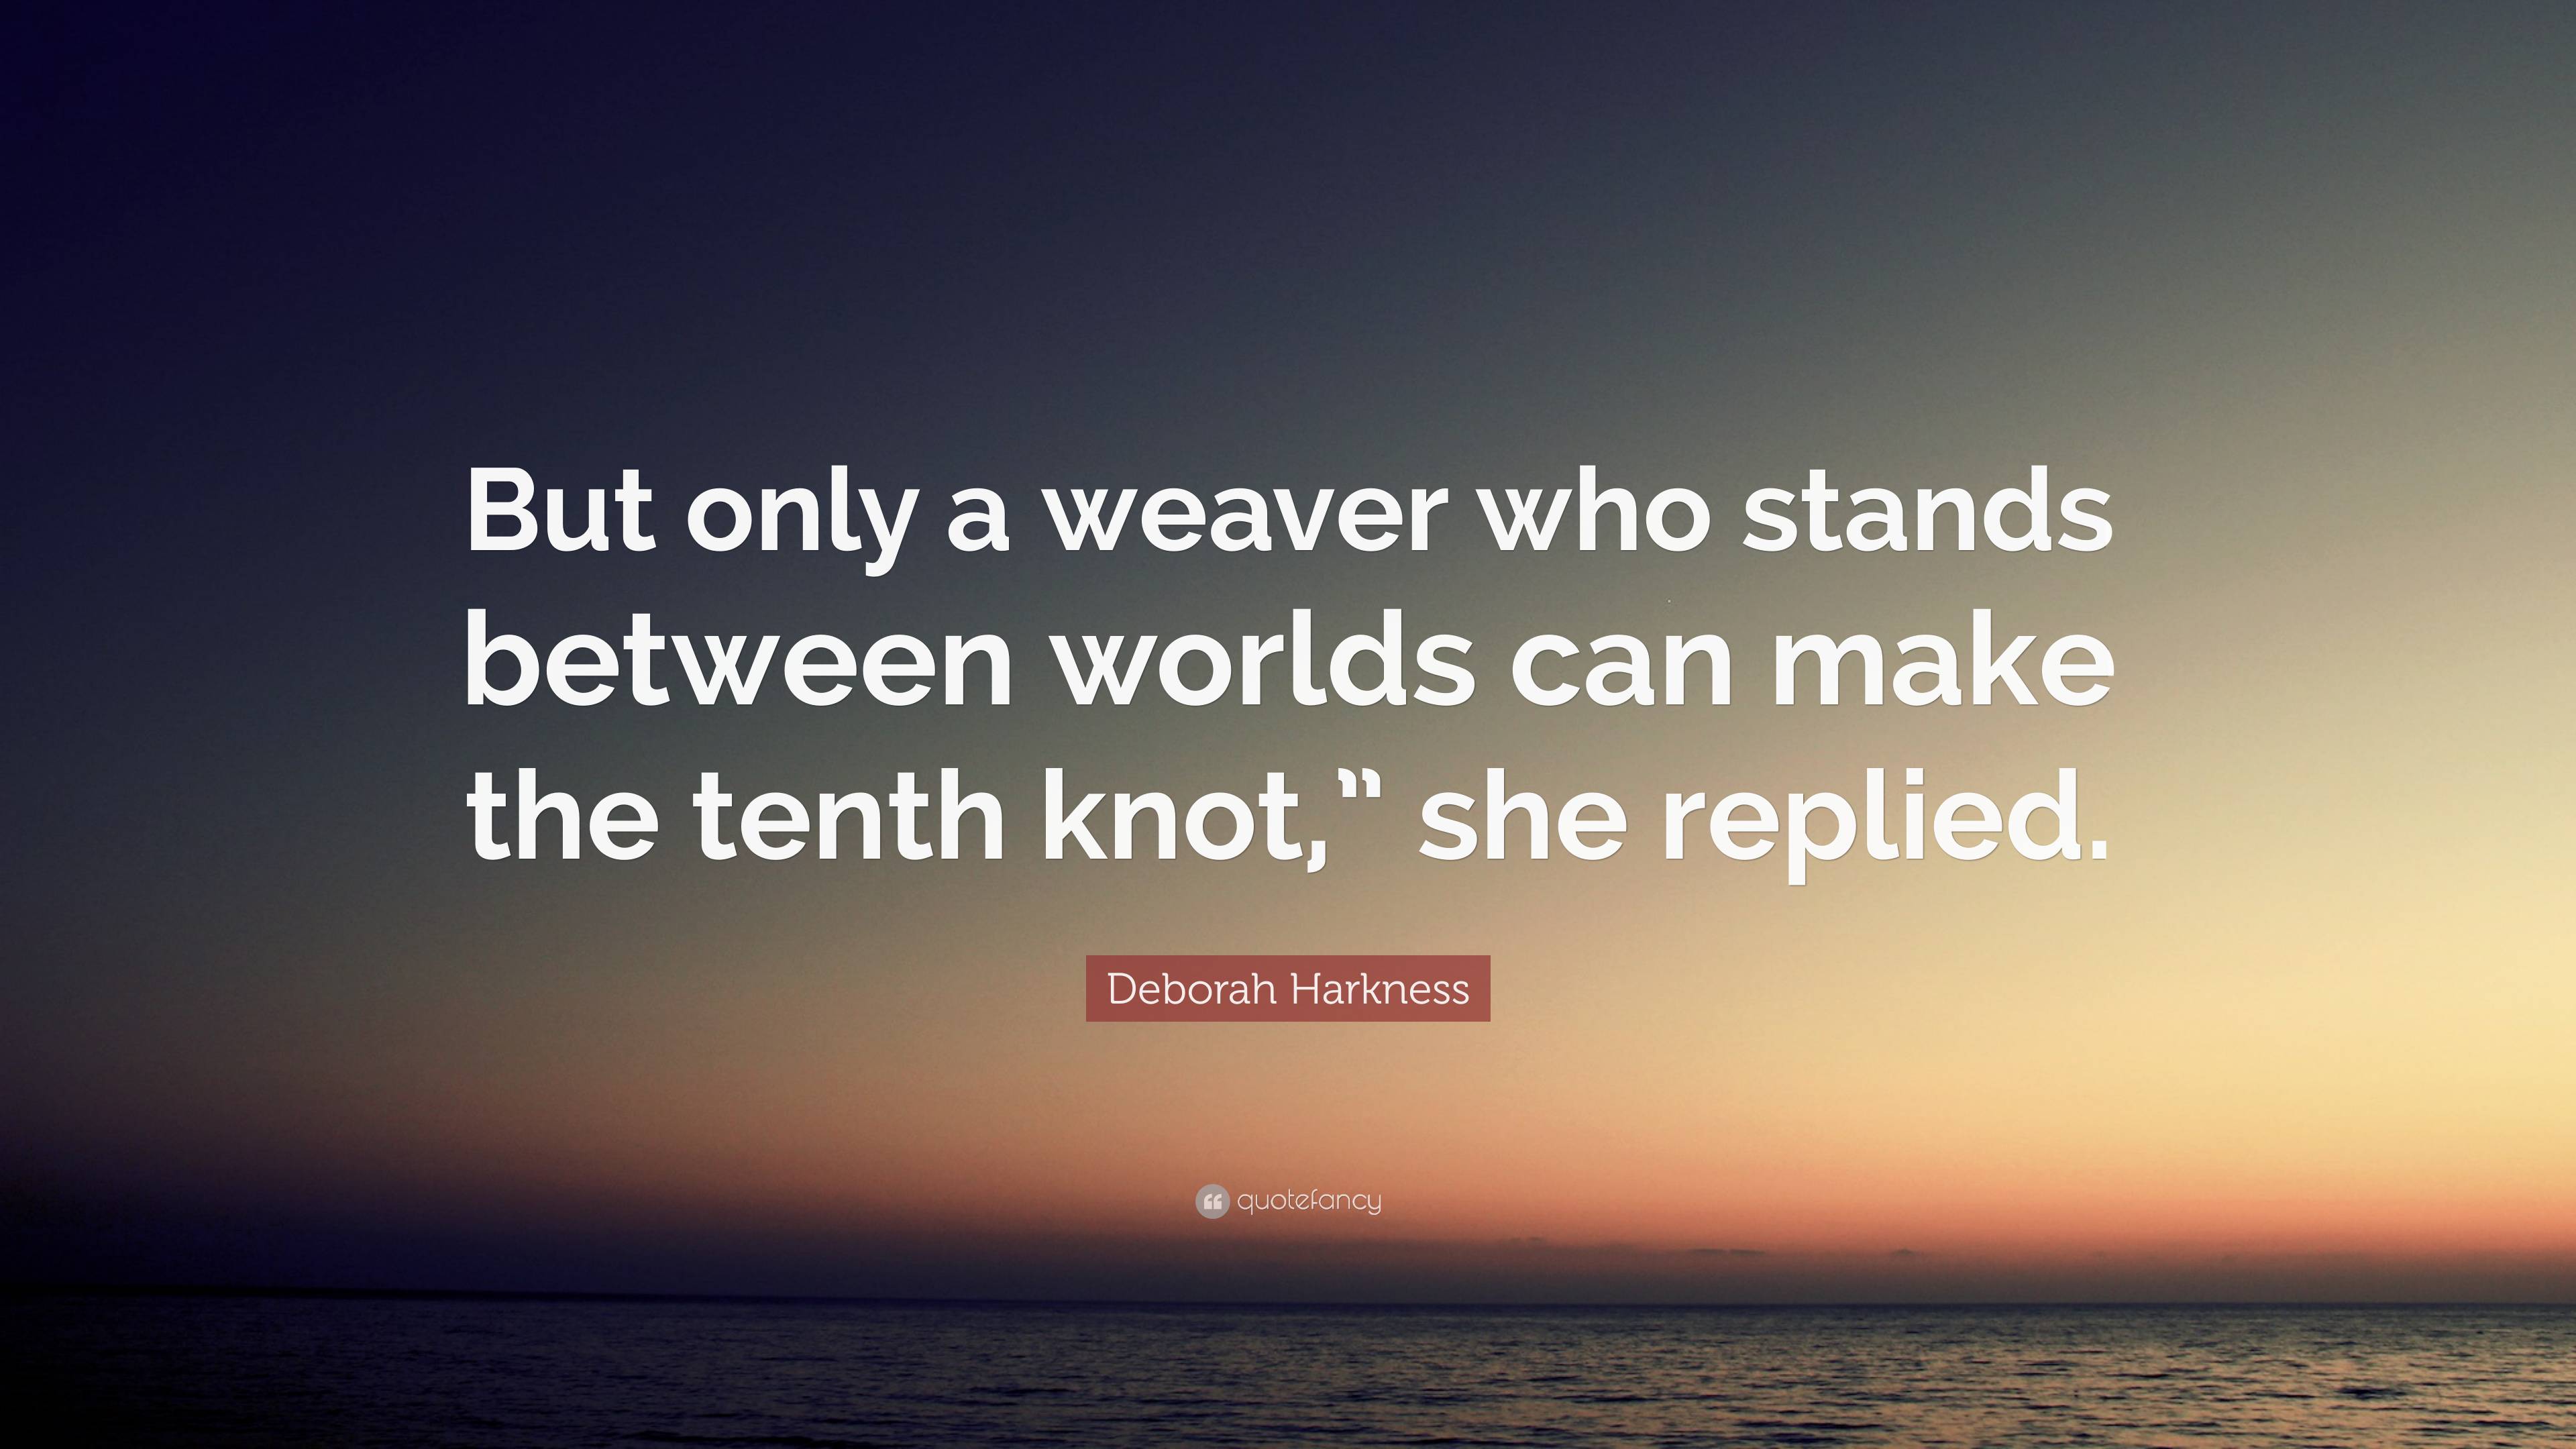 Deborah Harkness Quote “but Only A Weaver Who Stands Between Worlds Can Make The Tenth Knot